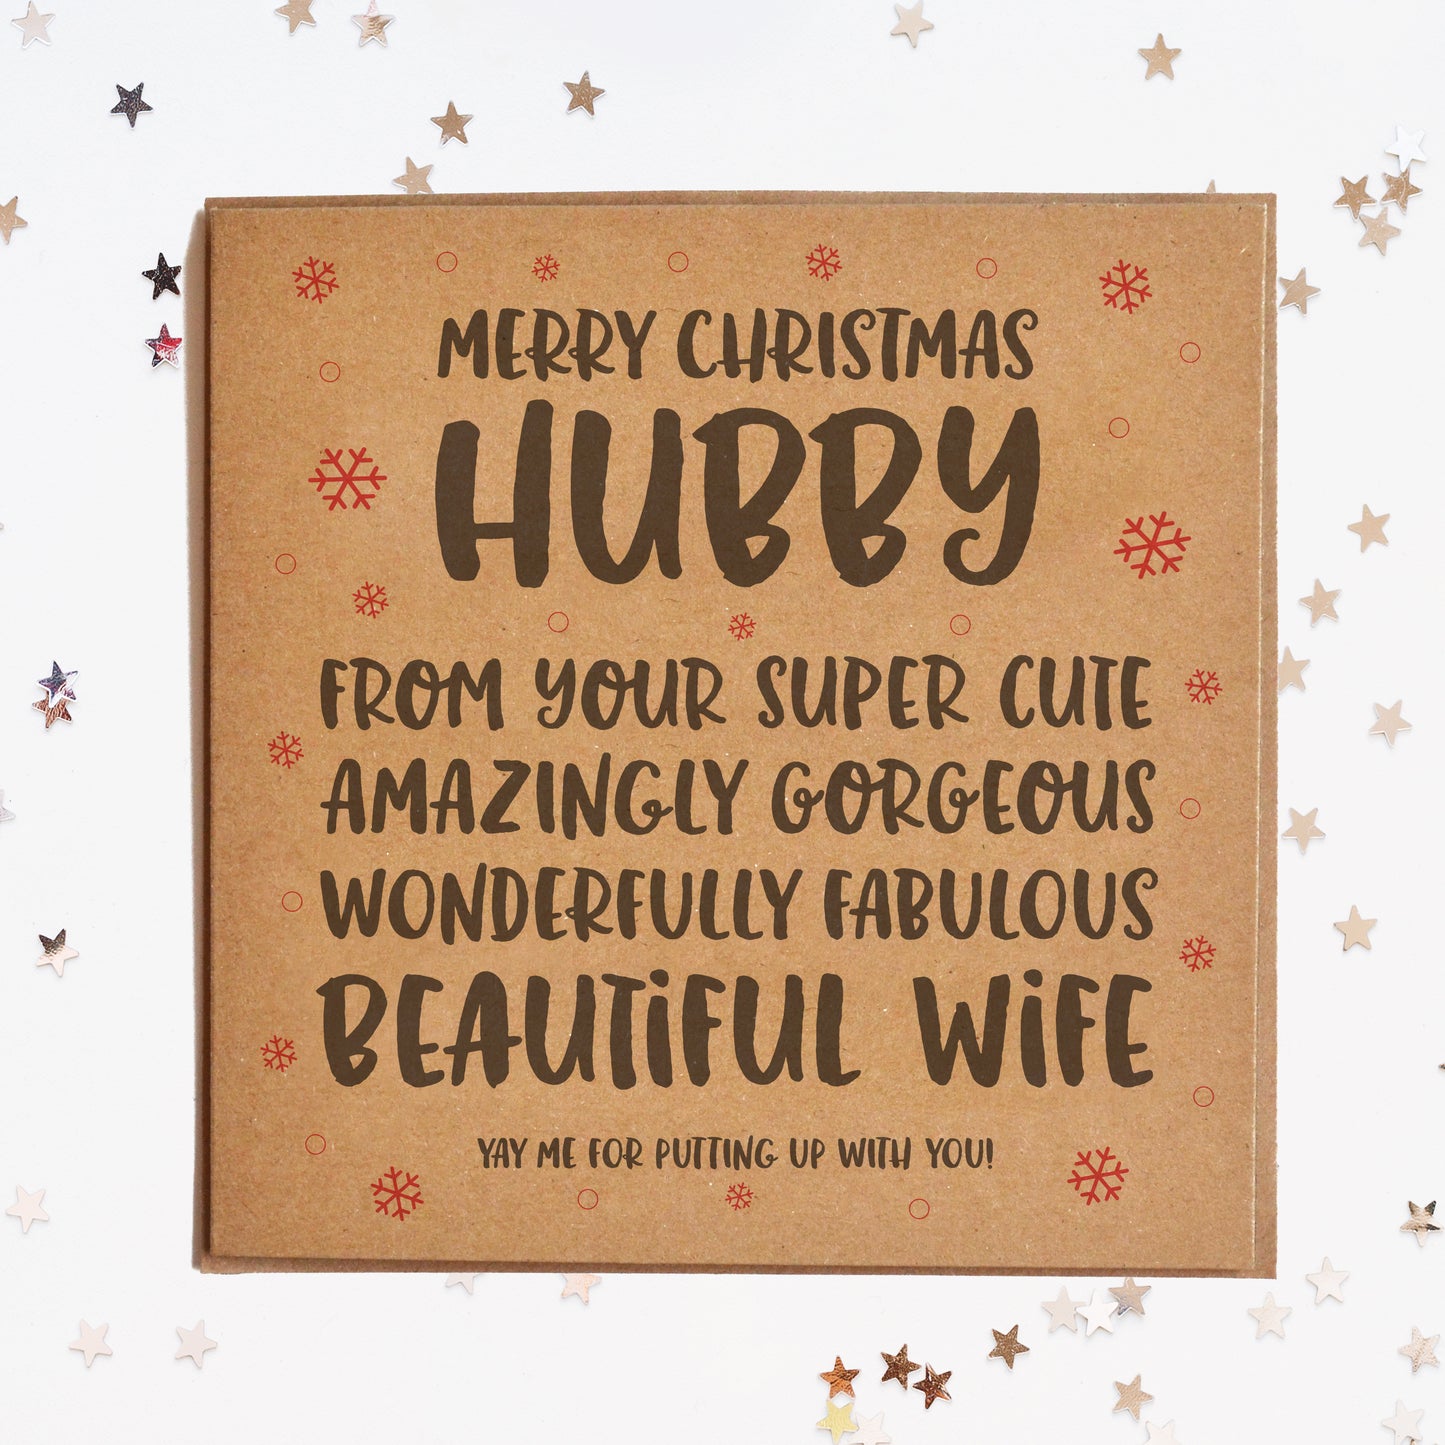 A funny Christmas card for the husband, in festive colours and a message saying "MERRY CHRISTMAS HUBBY! FROM YOUR SUPER CUTE, AMAZINGLY GORGEOUS, WONDERFULLY FABULOUS BEAUTIFUL WIFE! YAY ME FOR PUTTING UP WITH YOU!"